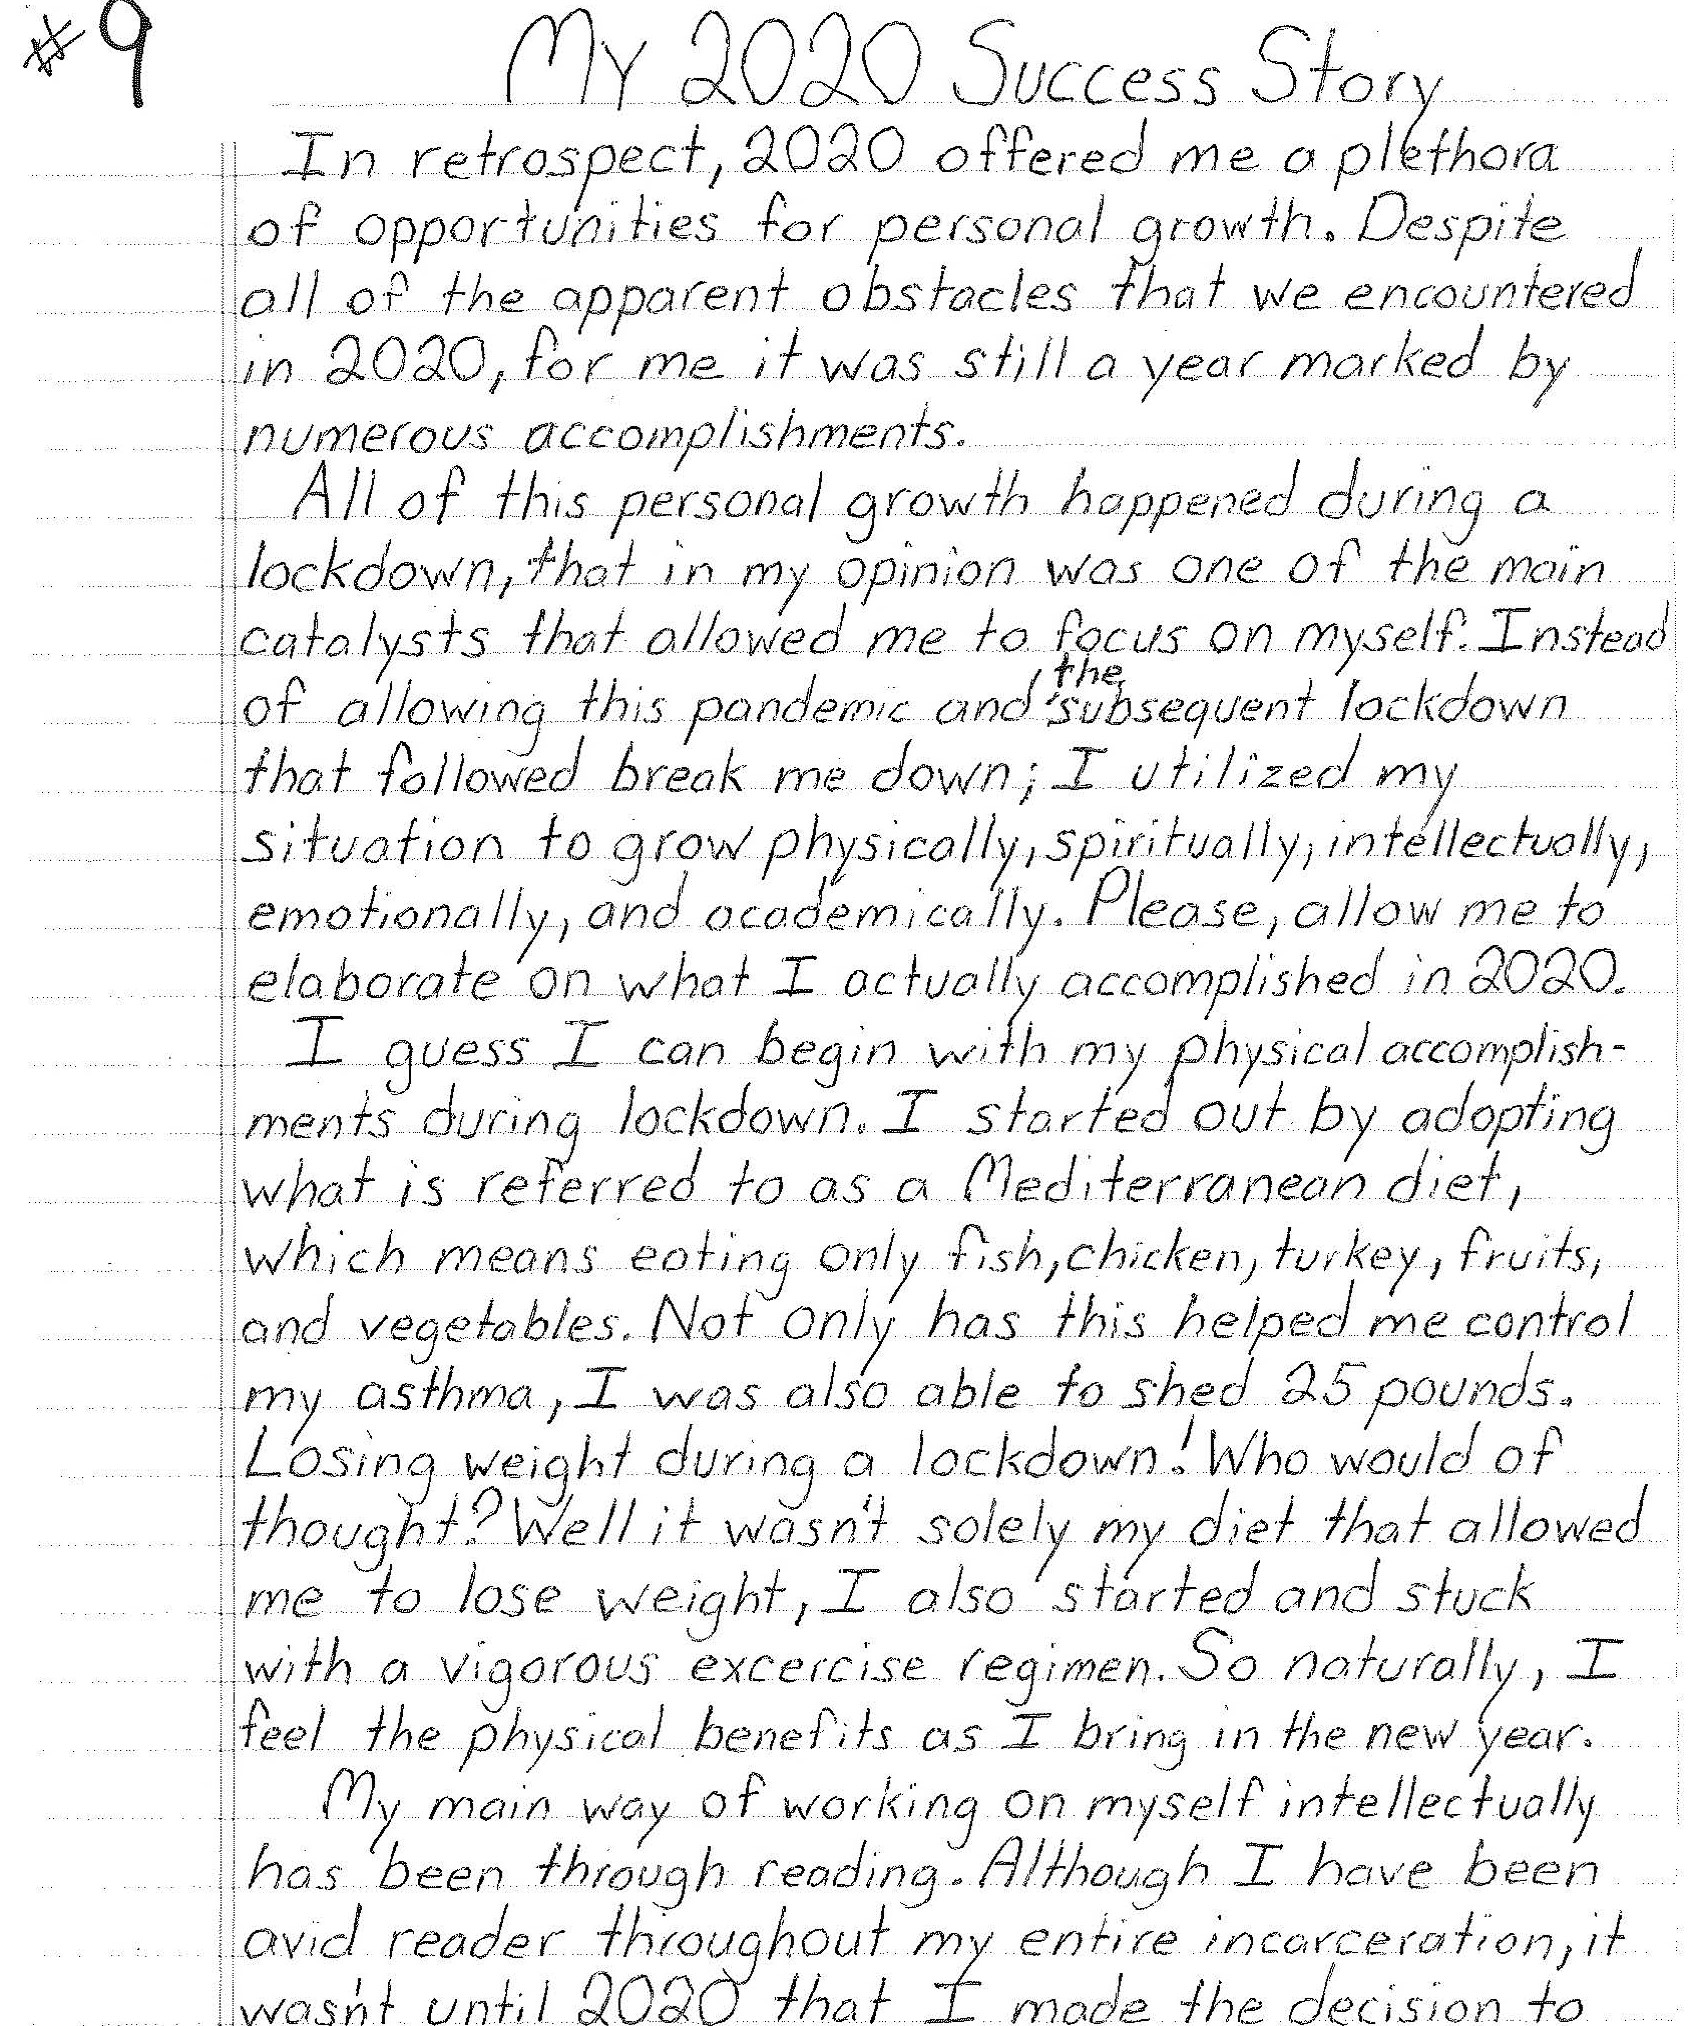 The first page of the winning essay